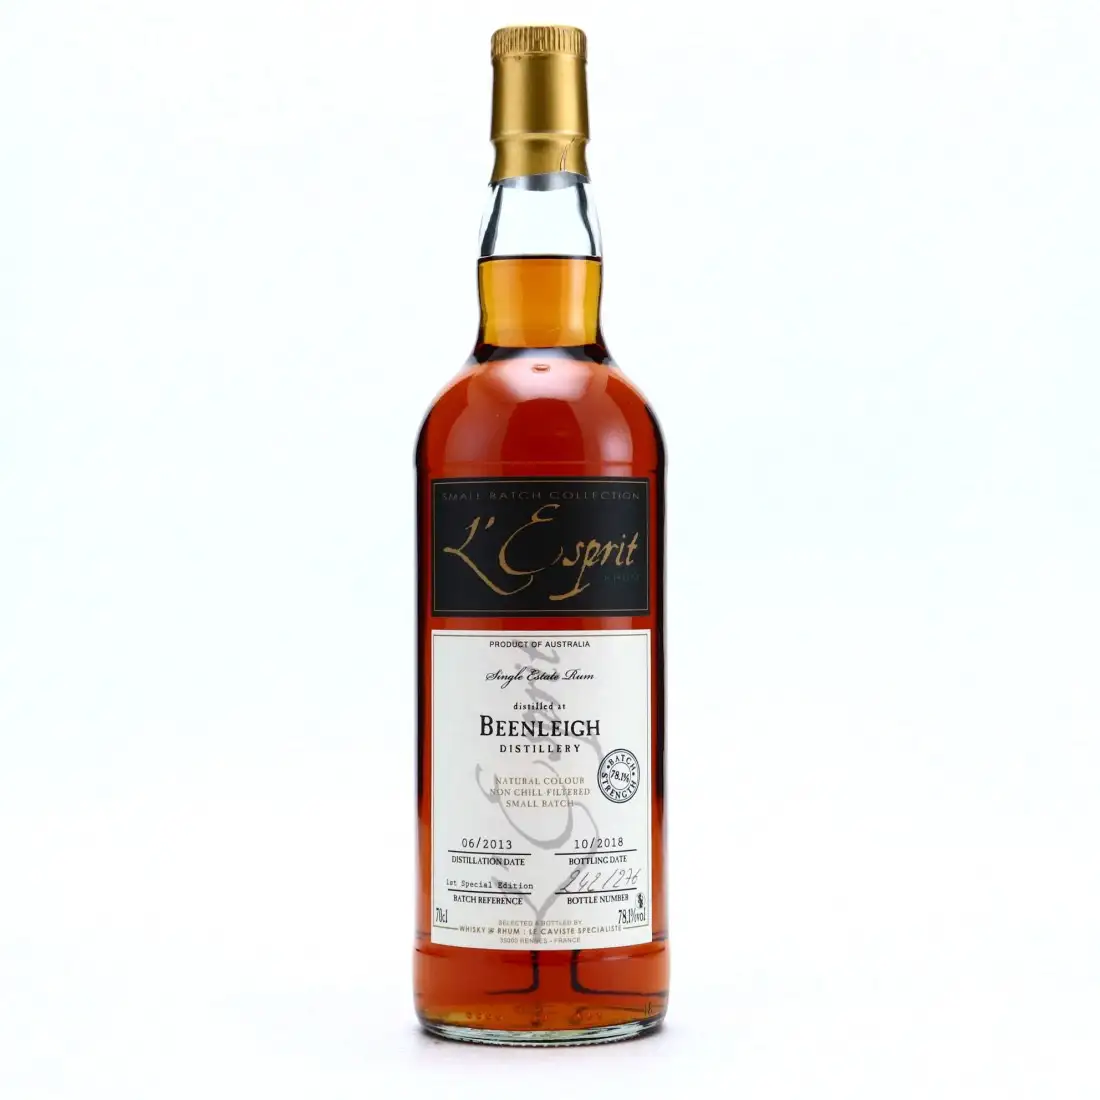 Image of the front of the bottle of the rum L‘Esprit Australia Single Cask